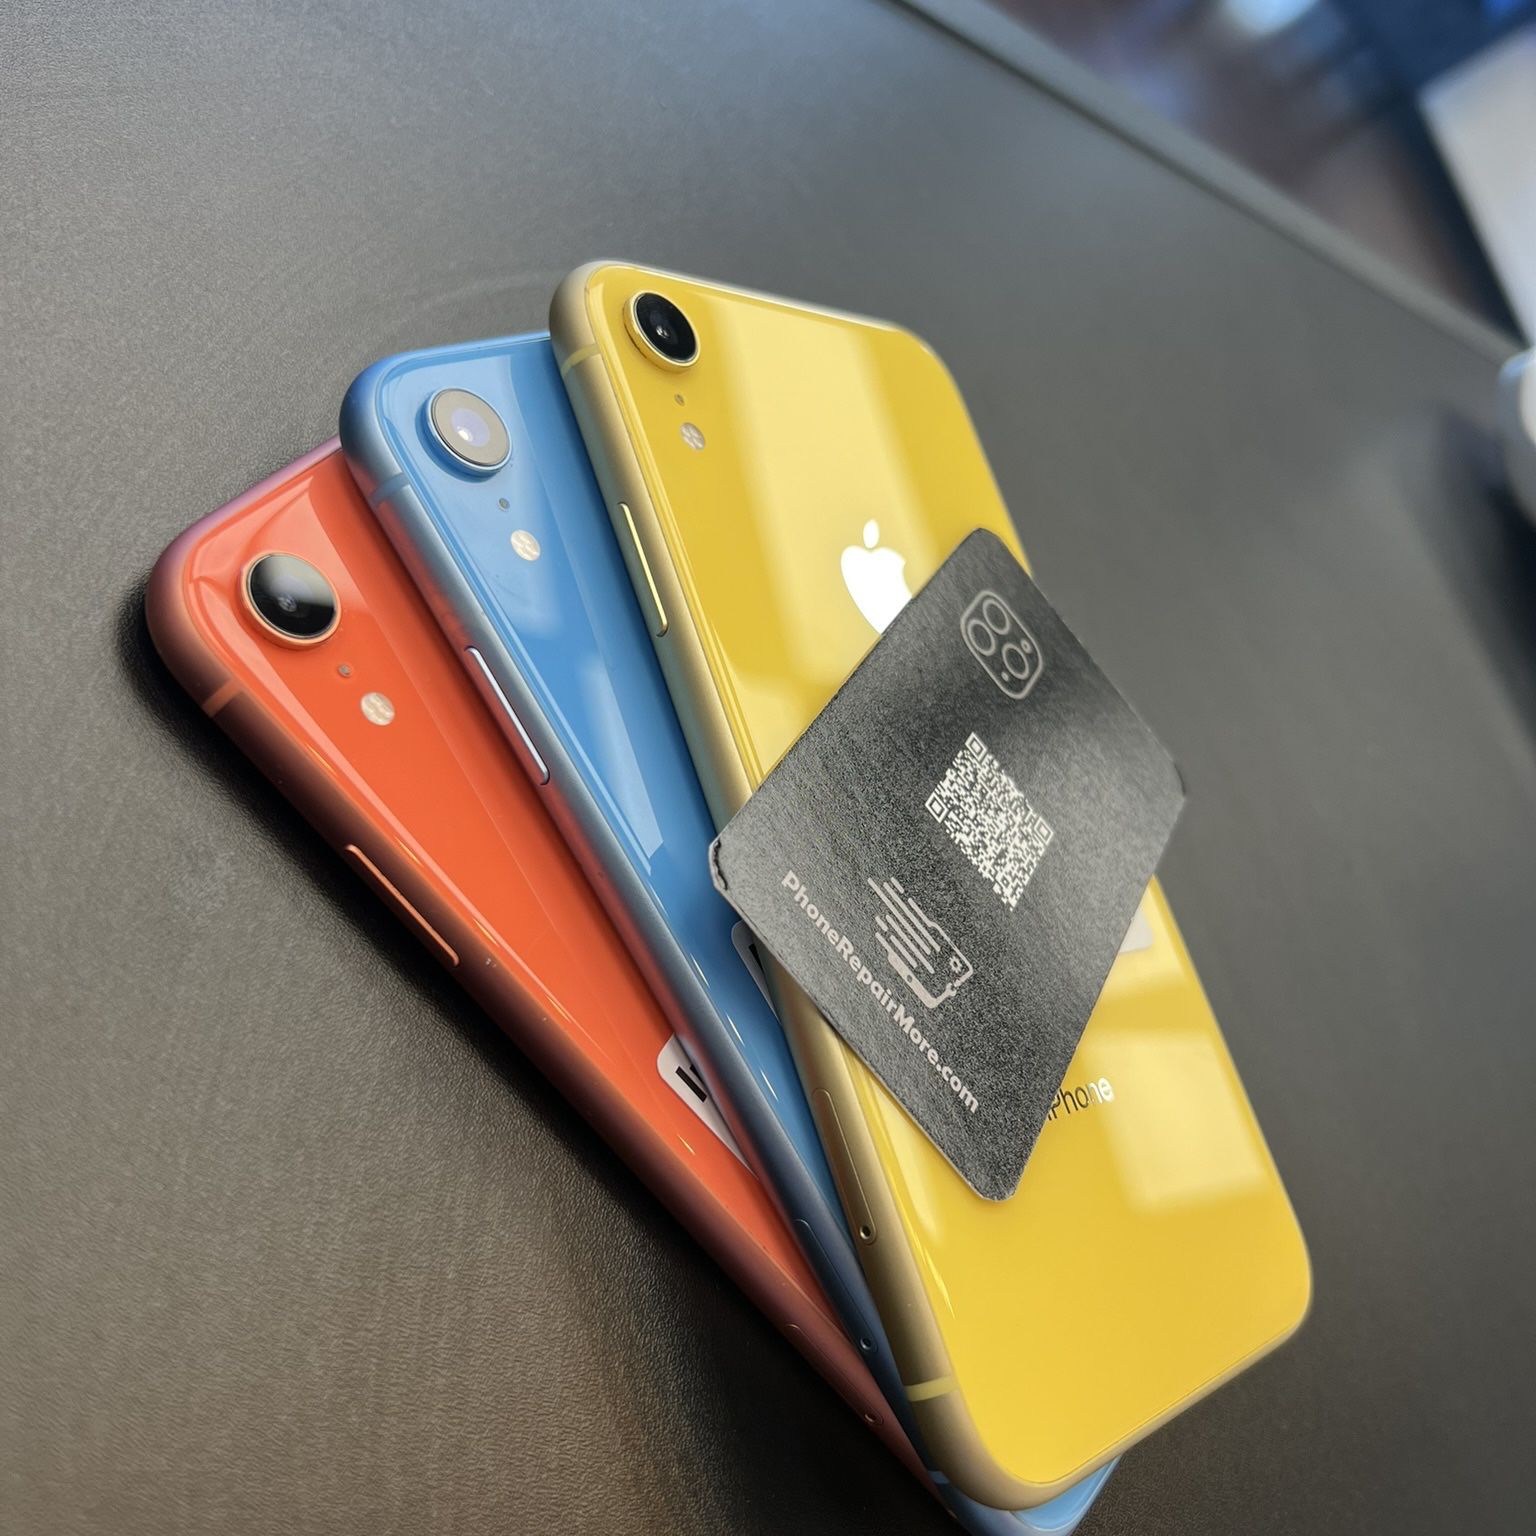 iPhone XR Unlocked for any carrier 🔓| Up to 90 Days warranty✅ | All colors Available ❗️| Like New 